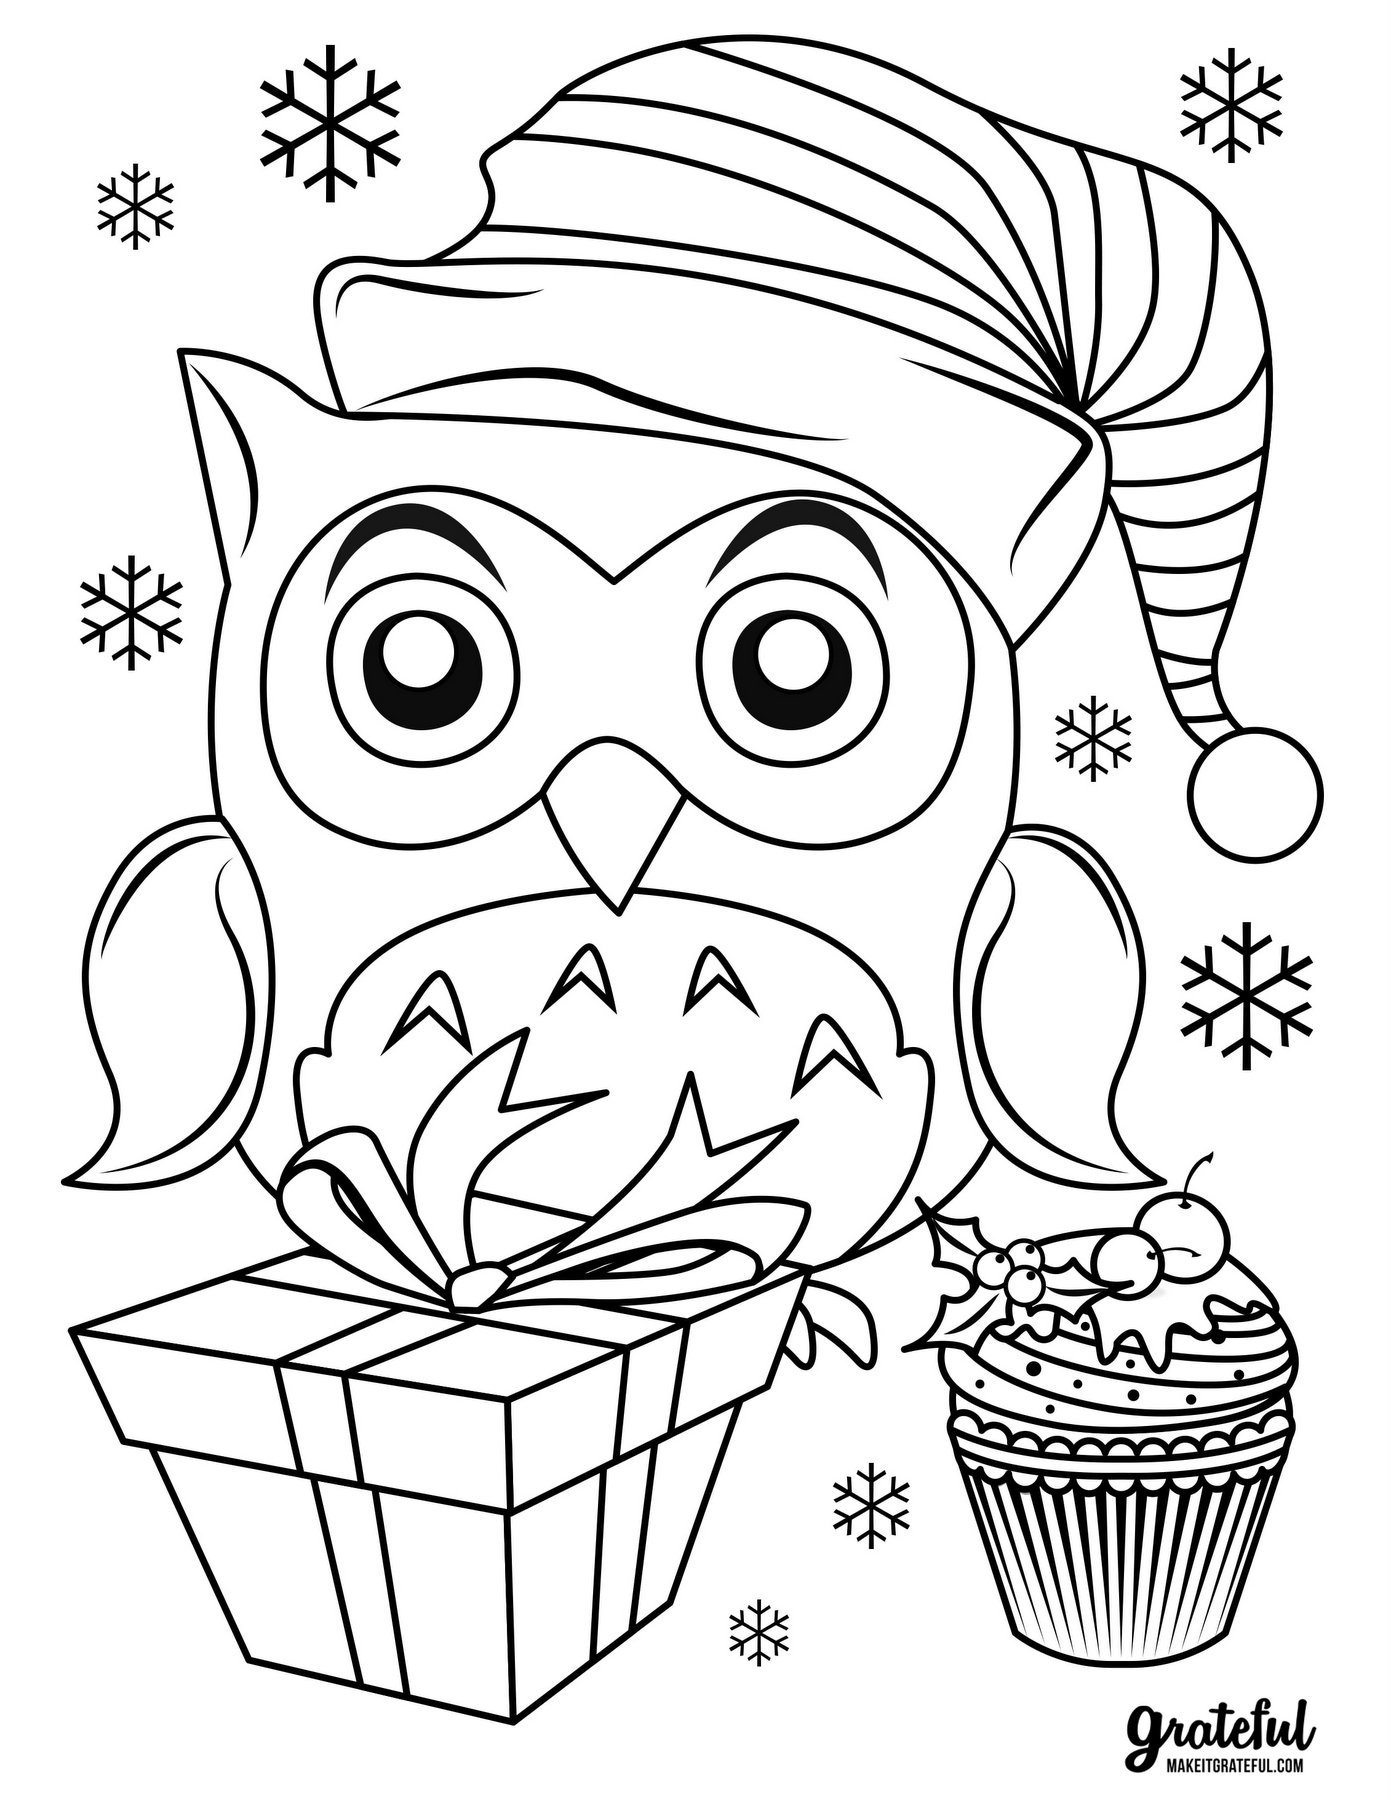 5 Christmas Coloring Pages Your Kids Will Love